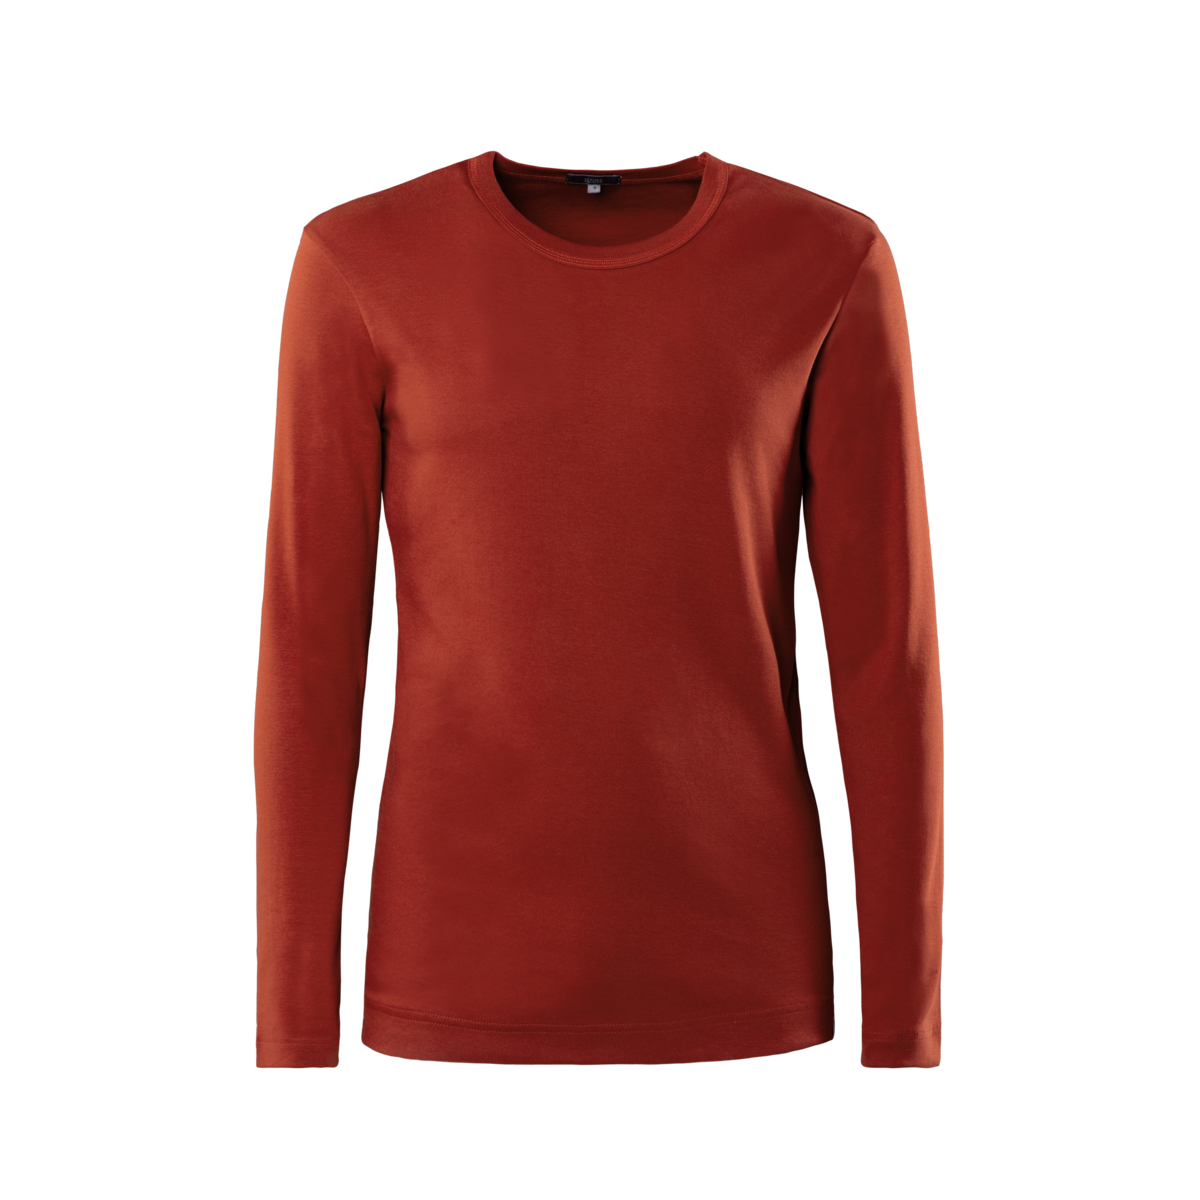 Red Long-sleeved shirt, LEANDRO